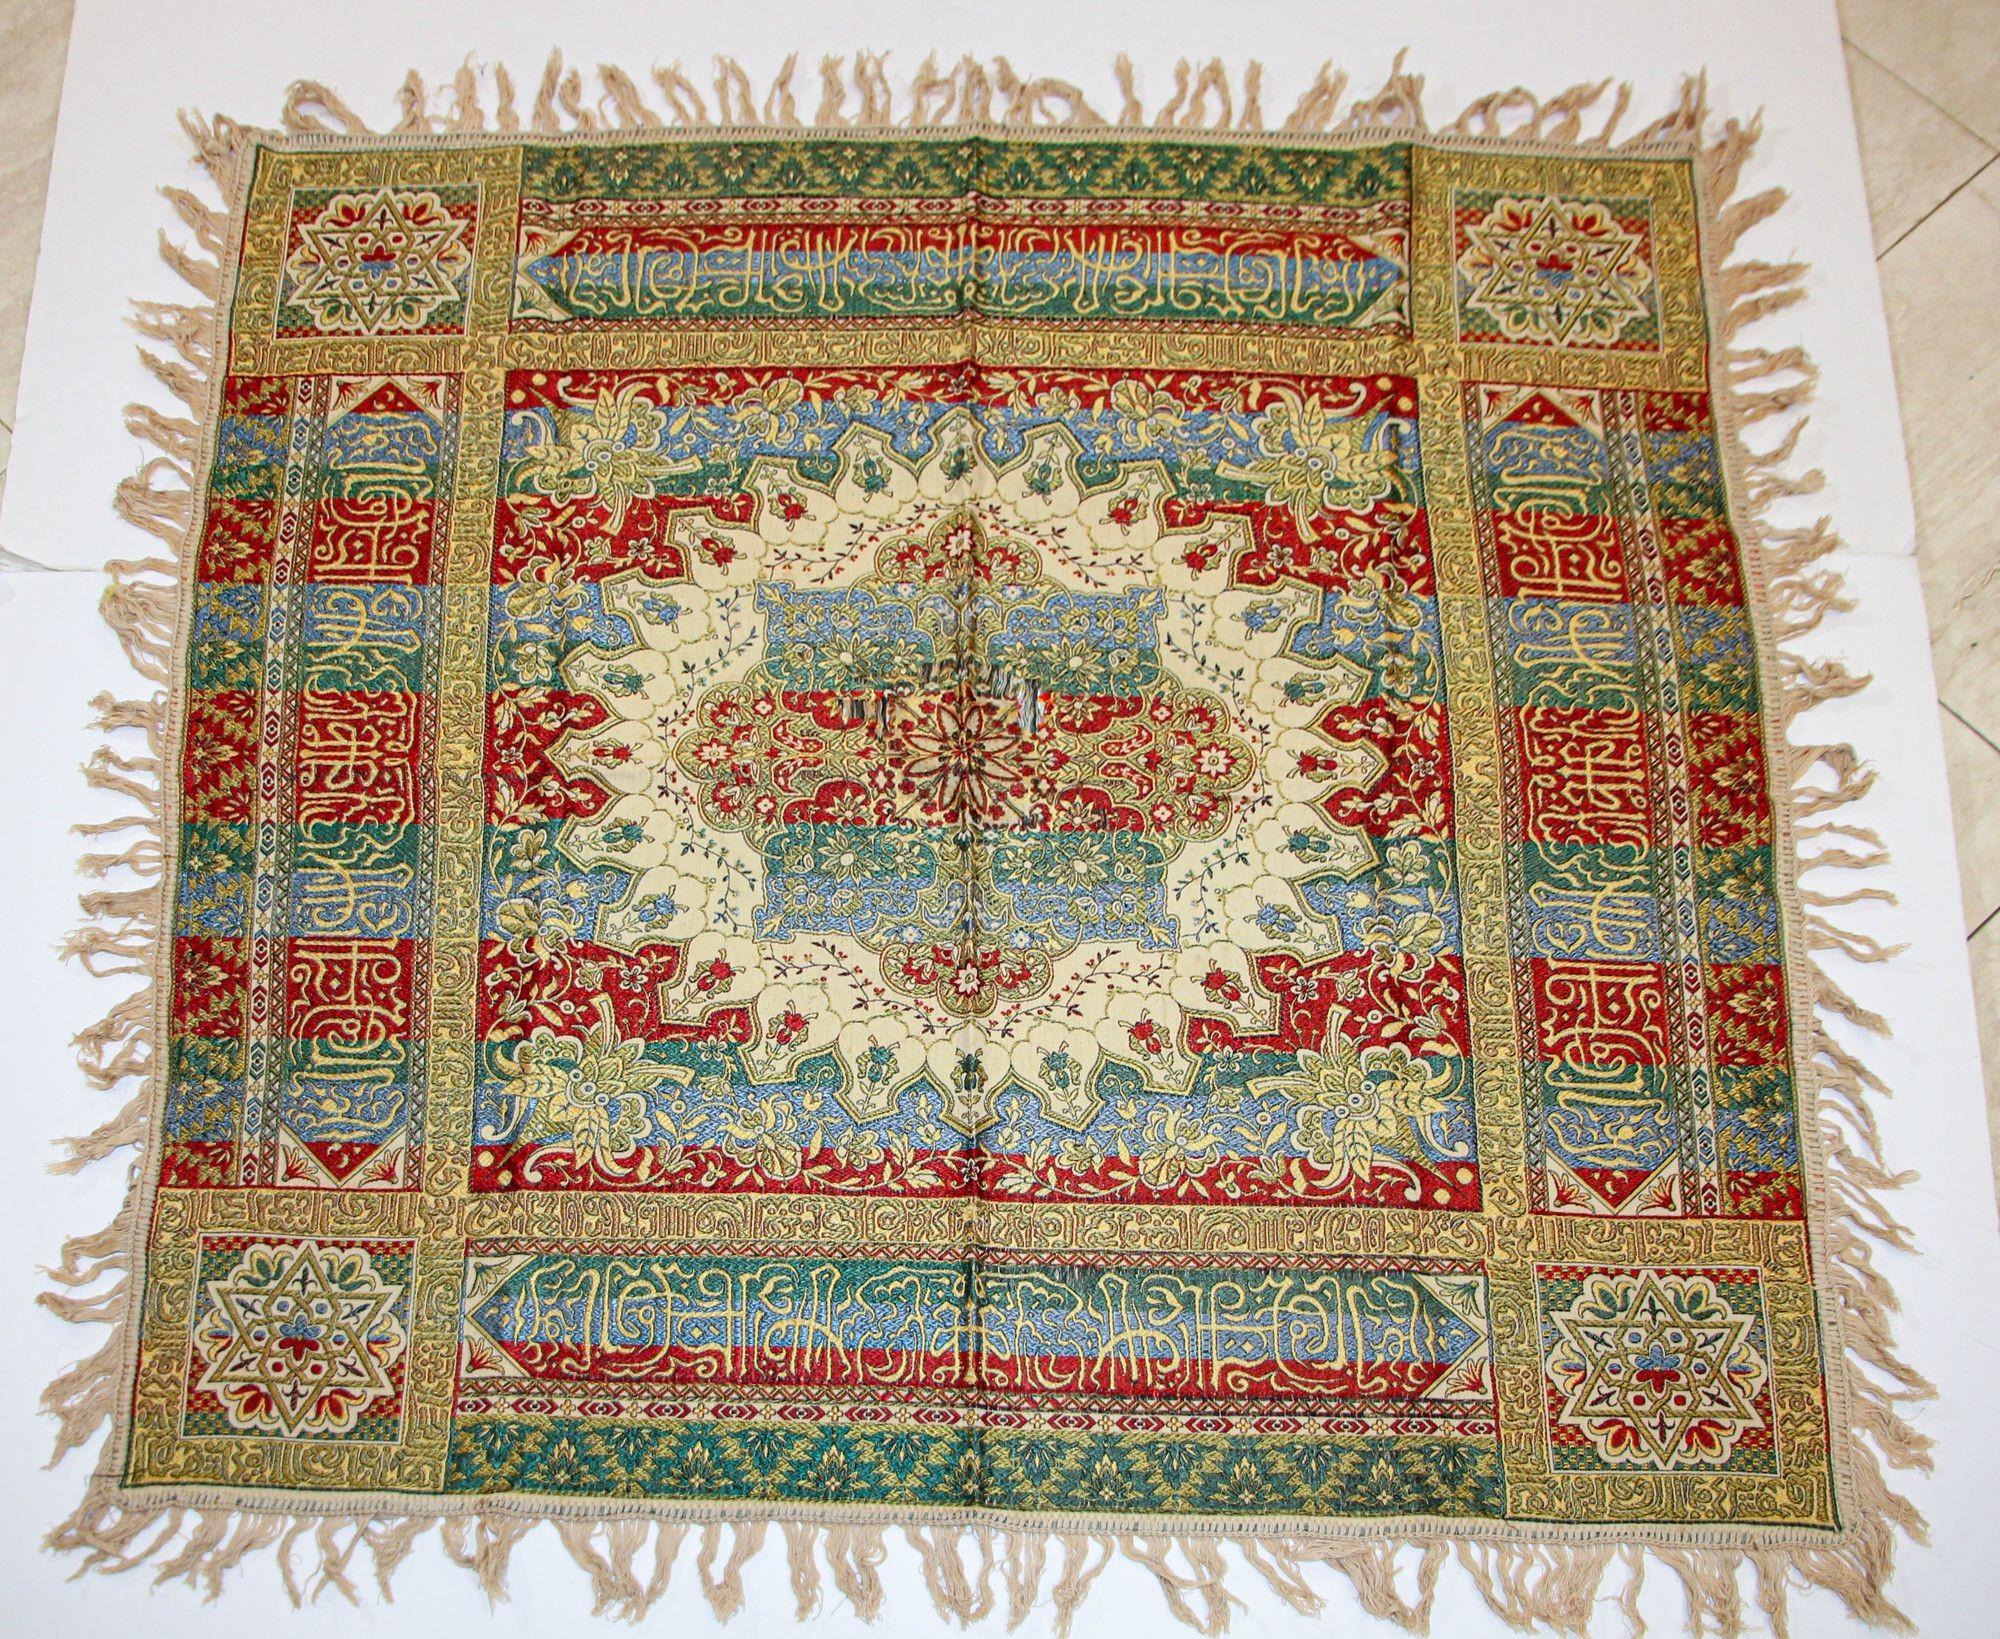 1940s Granada Islamic Spain Textile with Arabic Calligraphy Writing For Sale 11